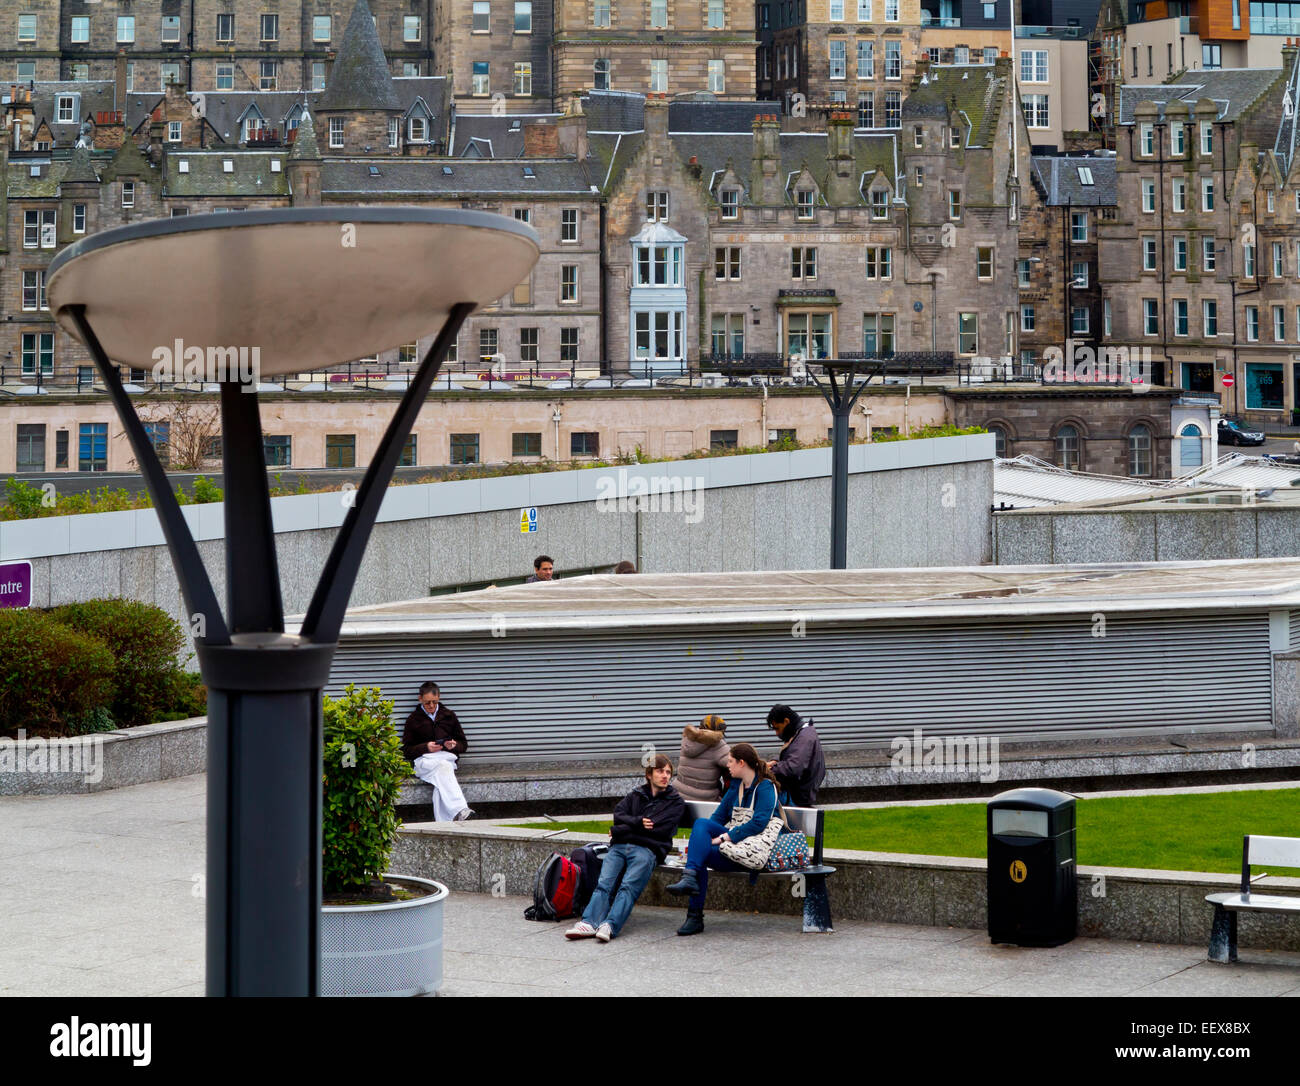 People sitting on benches in the city centre near Princes Street Edinburgh Scotland UK with the Old Town in the background Stock Photo